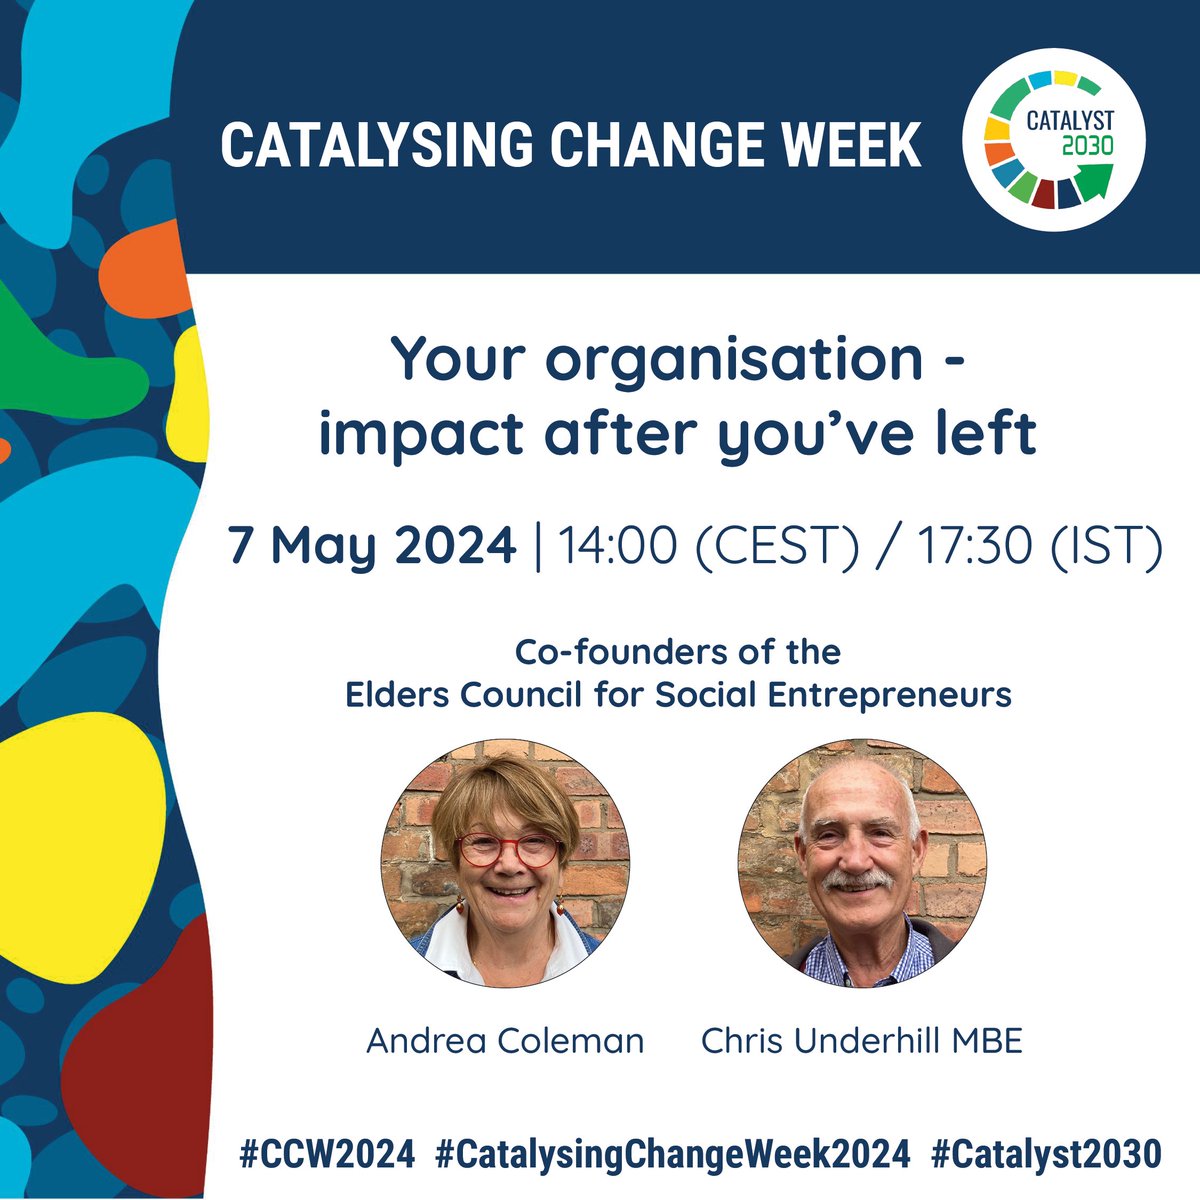 How do we ensure our work towards the #SDGs is not disrupted by the #succession process? Join our #CCW2024 webinar as co-founders Chris Underhill & Andrea Coleman discuss the vital importance of #SuccessionPlanning in achieving the #SDG's. Register free: catalyst2030.net/register/?redi…